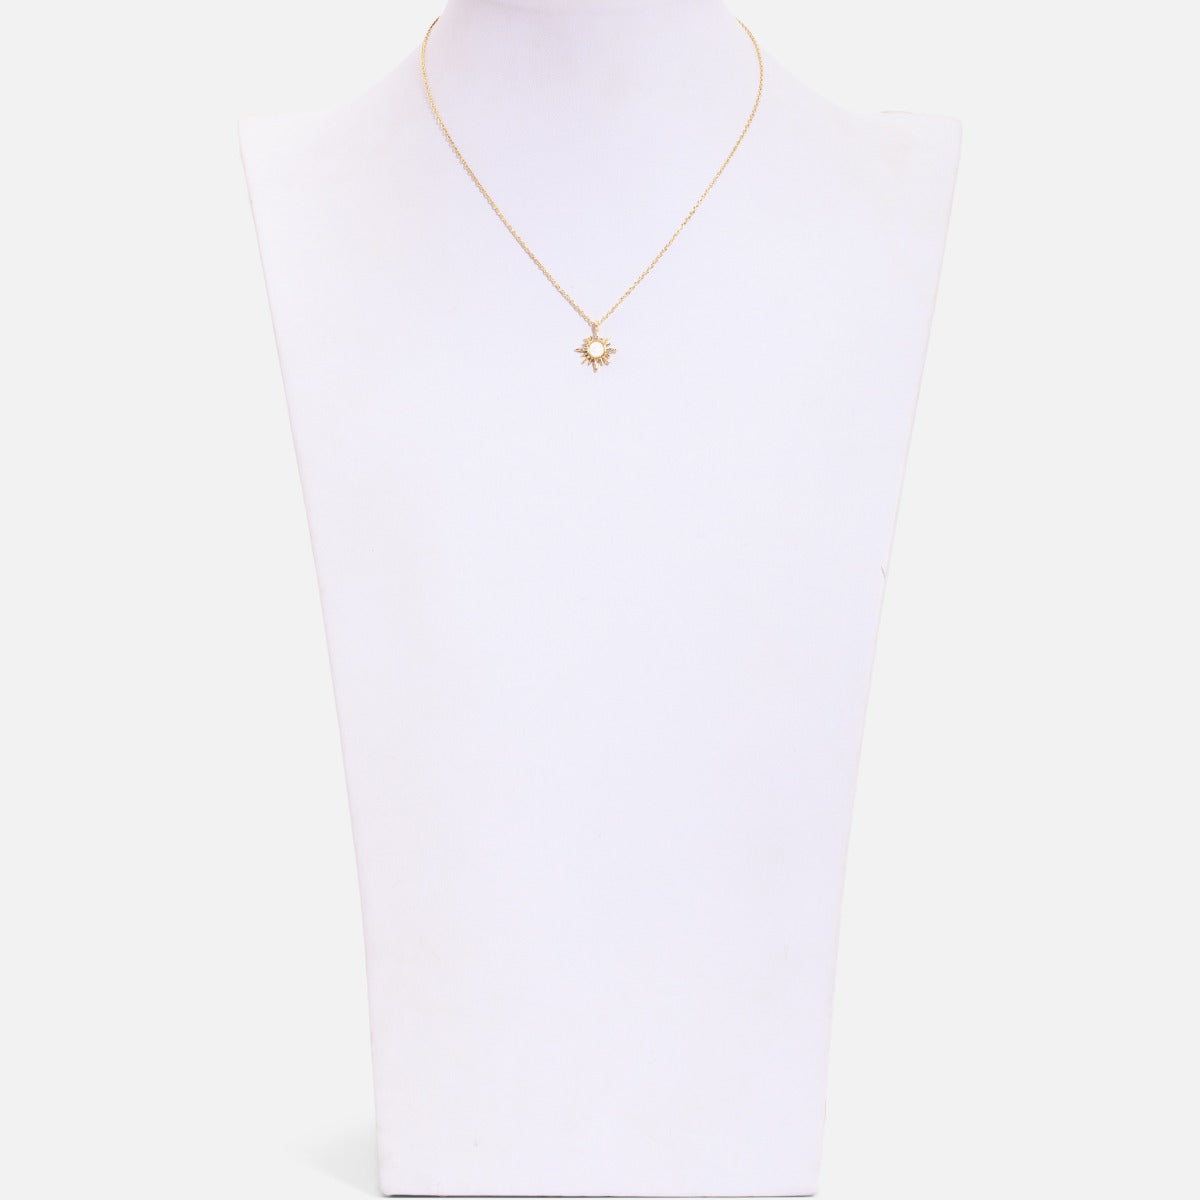 Golden necklace with sun medallion with mother-of-pearl and glittering stones